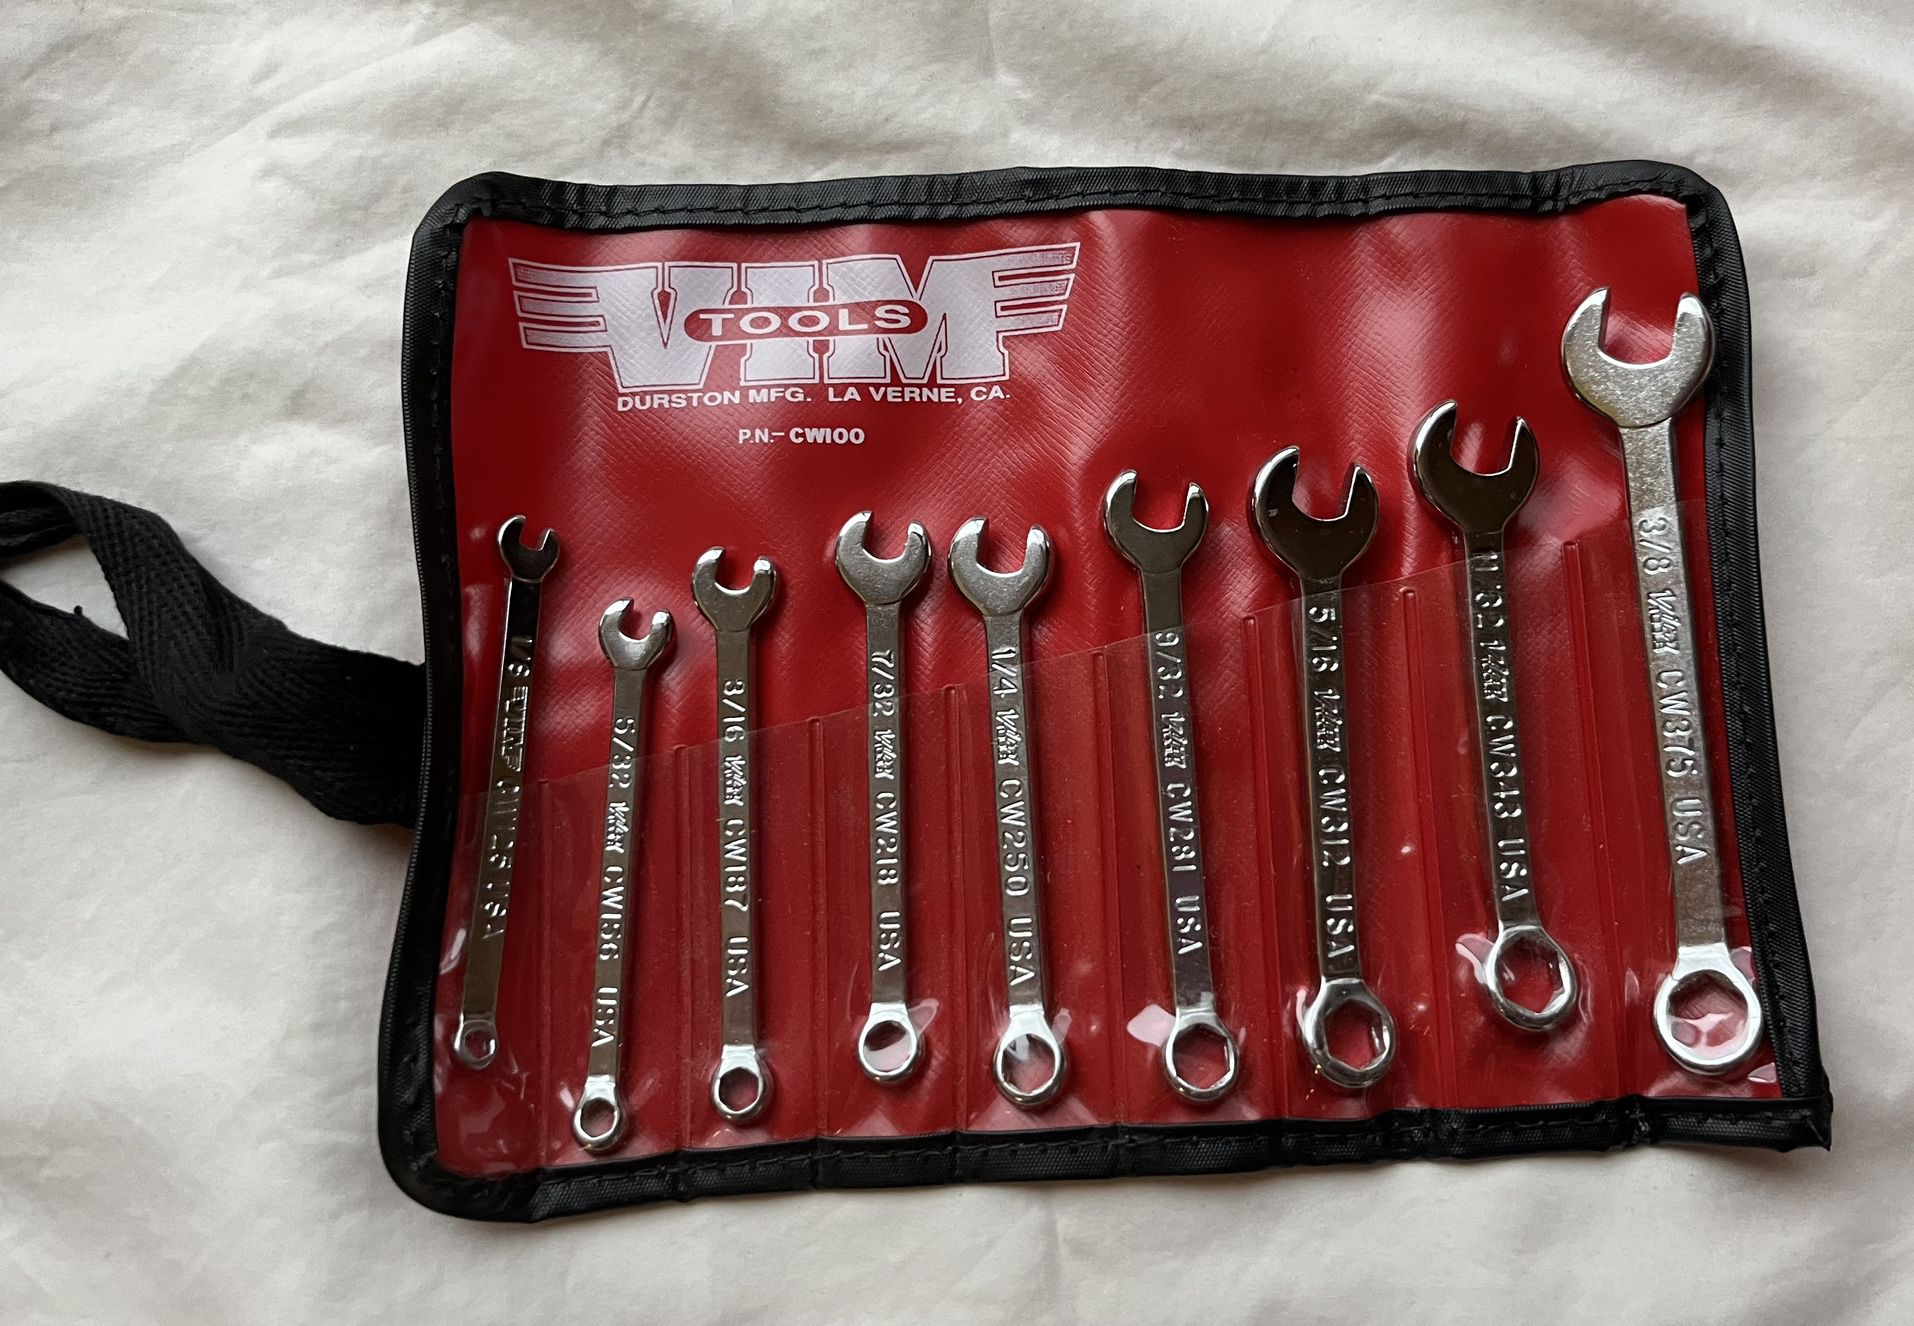 VIM Tools CW100 9 Piece Combo Wrench Set 1/8-3/8"